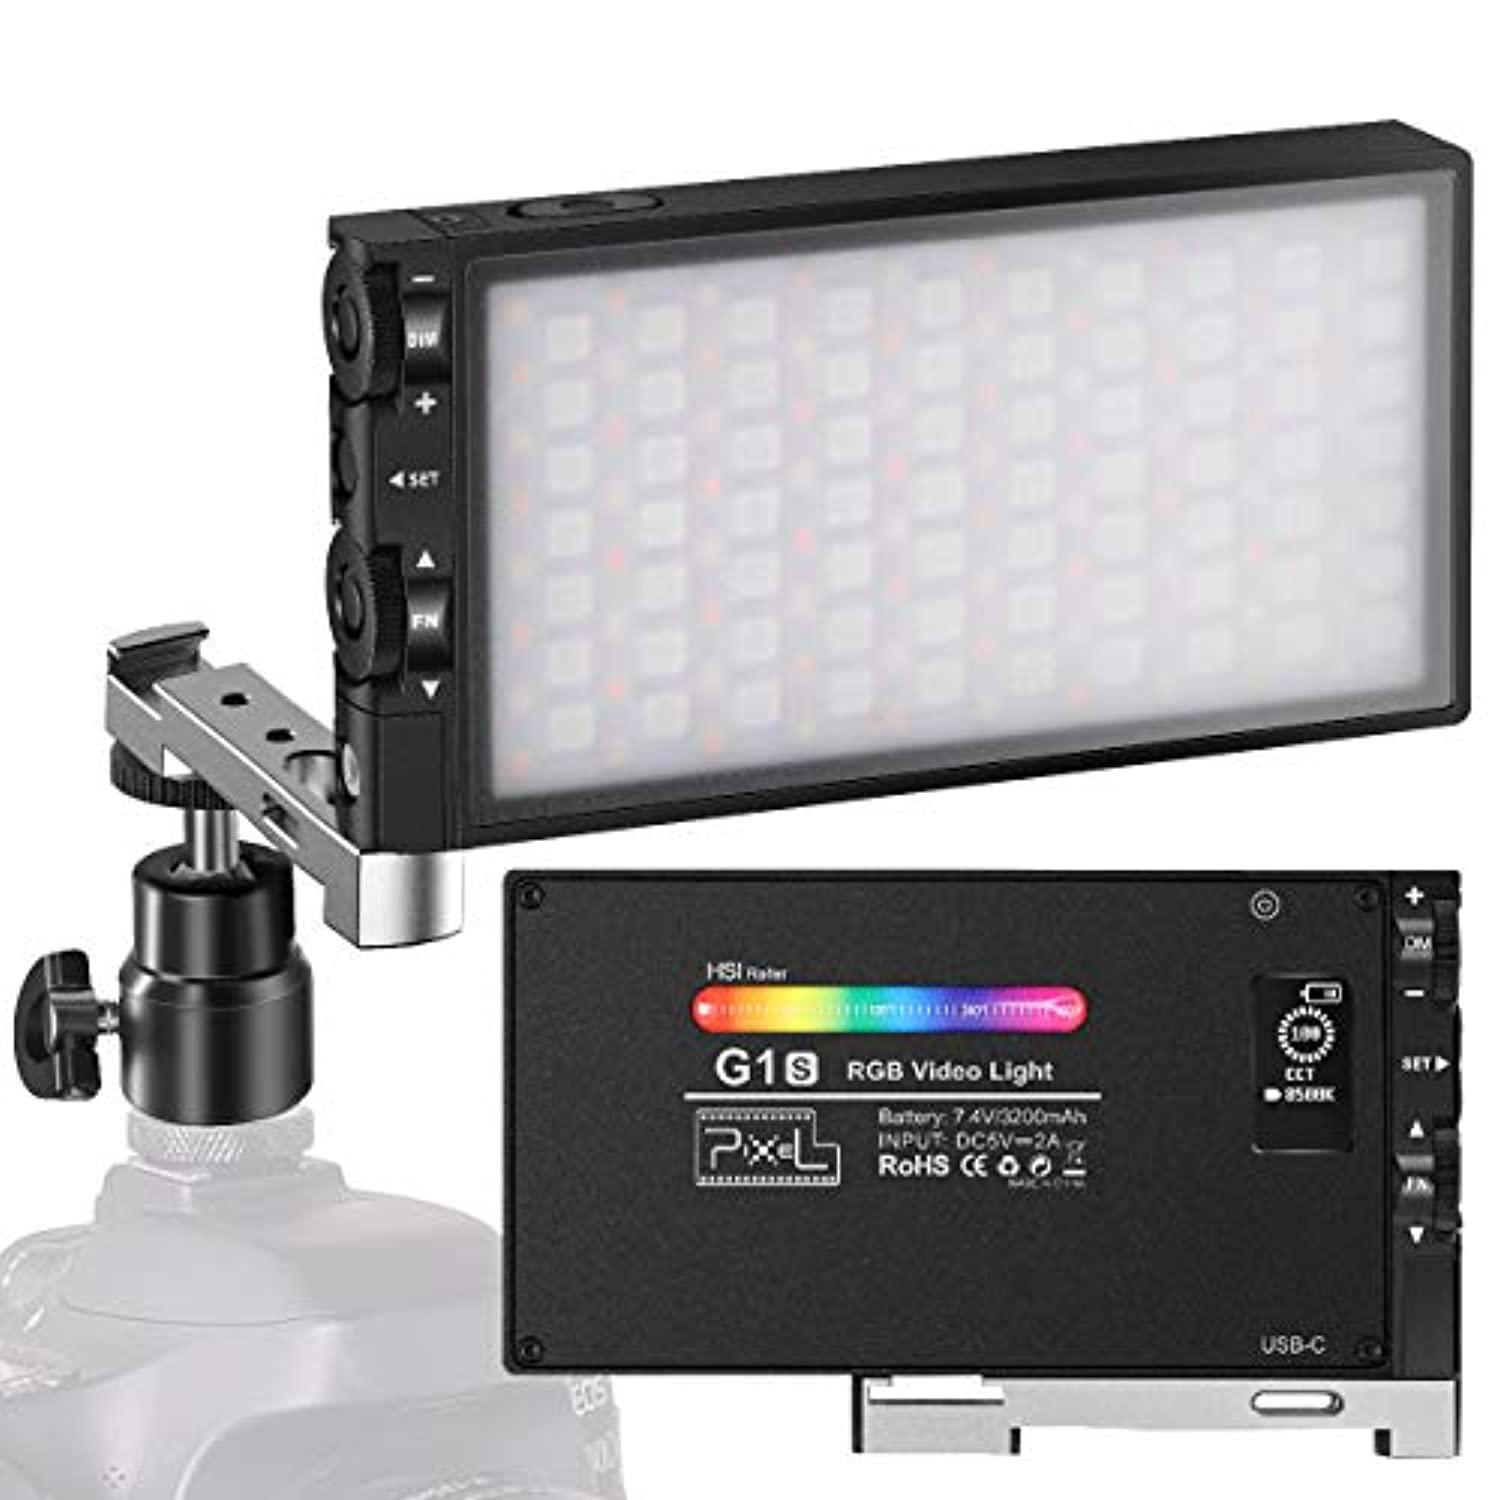 pixel g1s rgb video light, built-in 12w rechargeable battery led camera light full color 12 common light effects, cri?97 2500